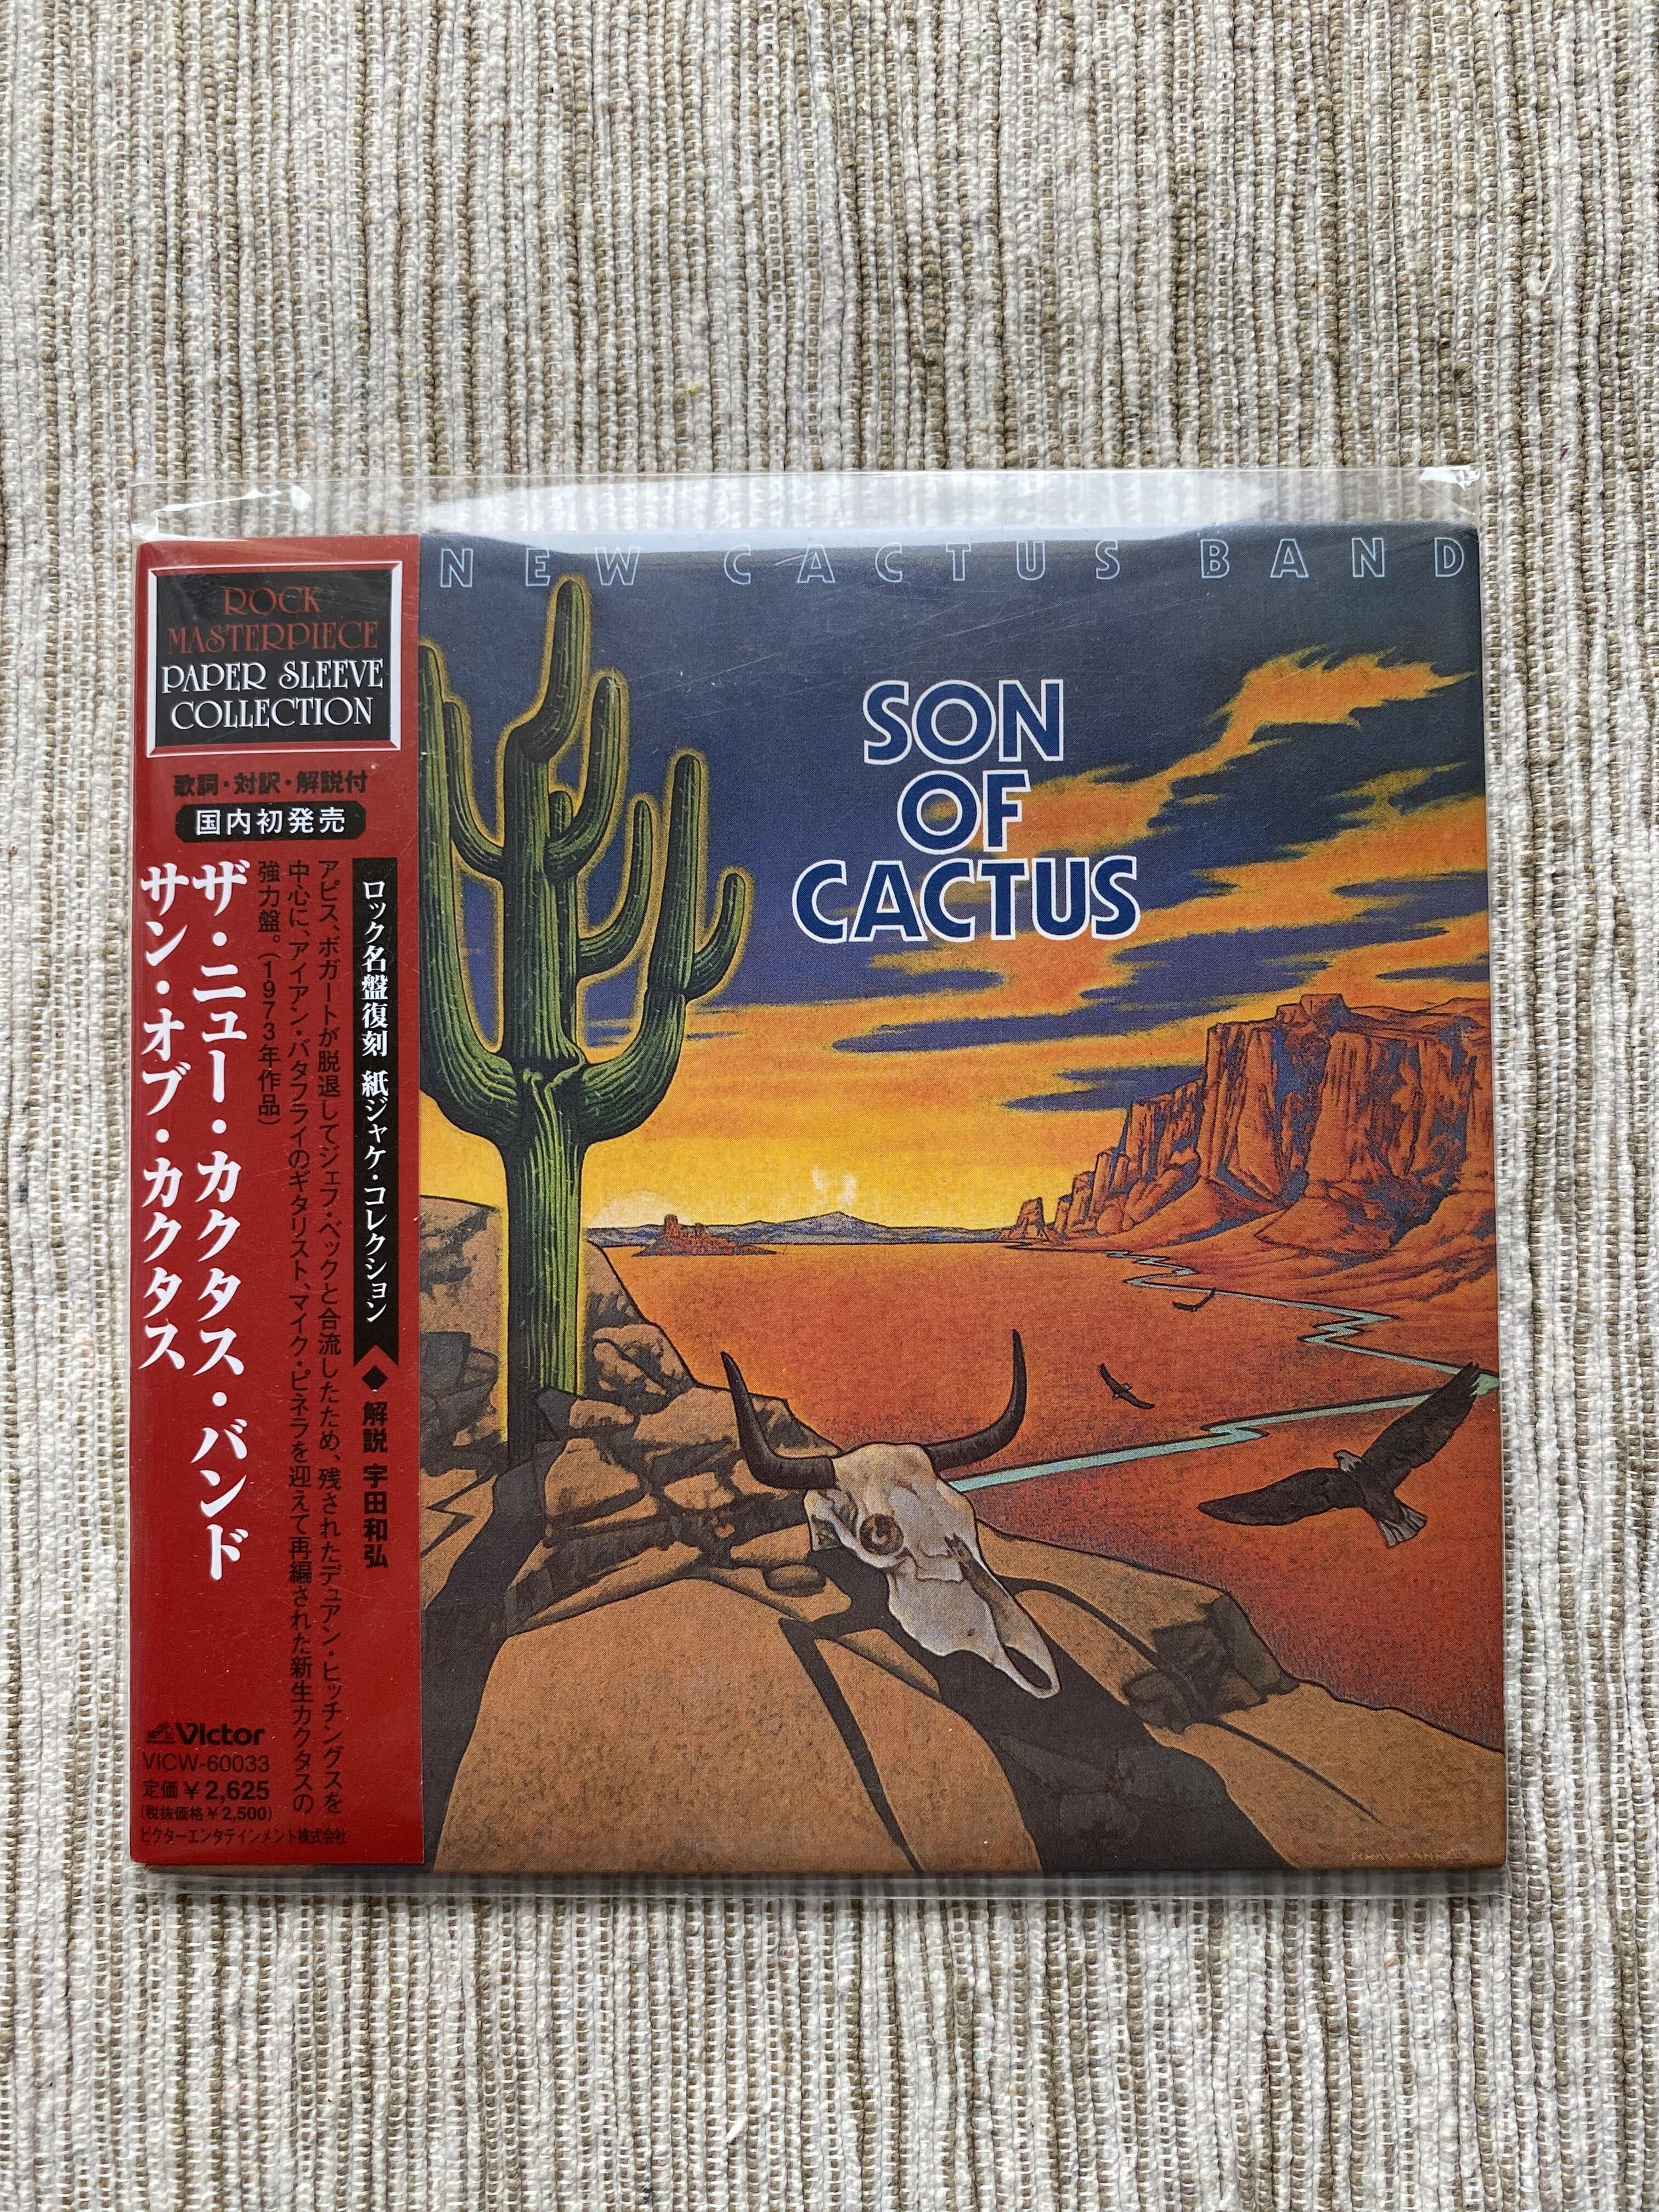 The New Cactus Band - Son Of Cactus CD Japonia / Japan Edition